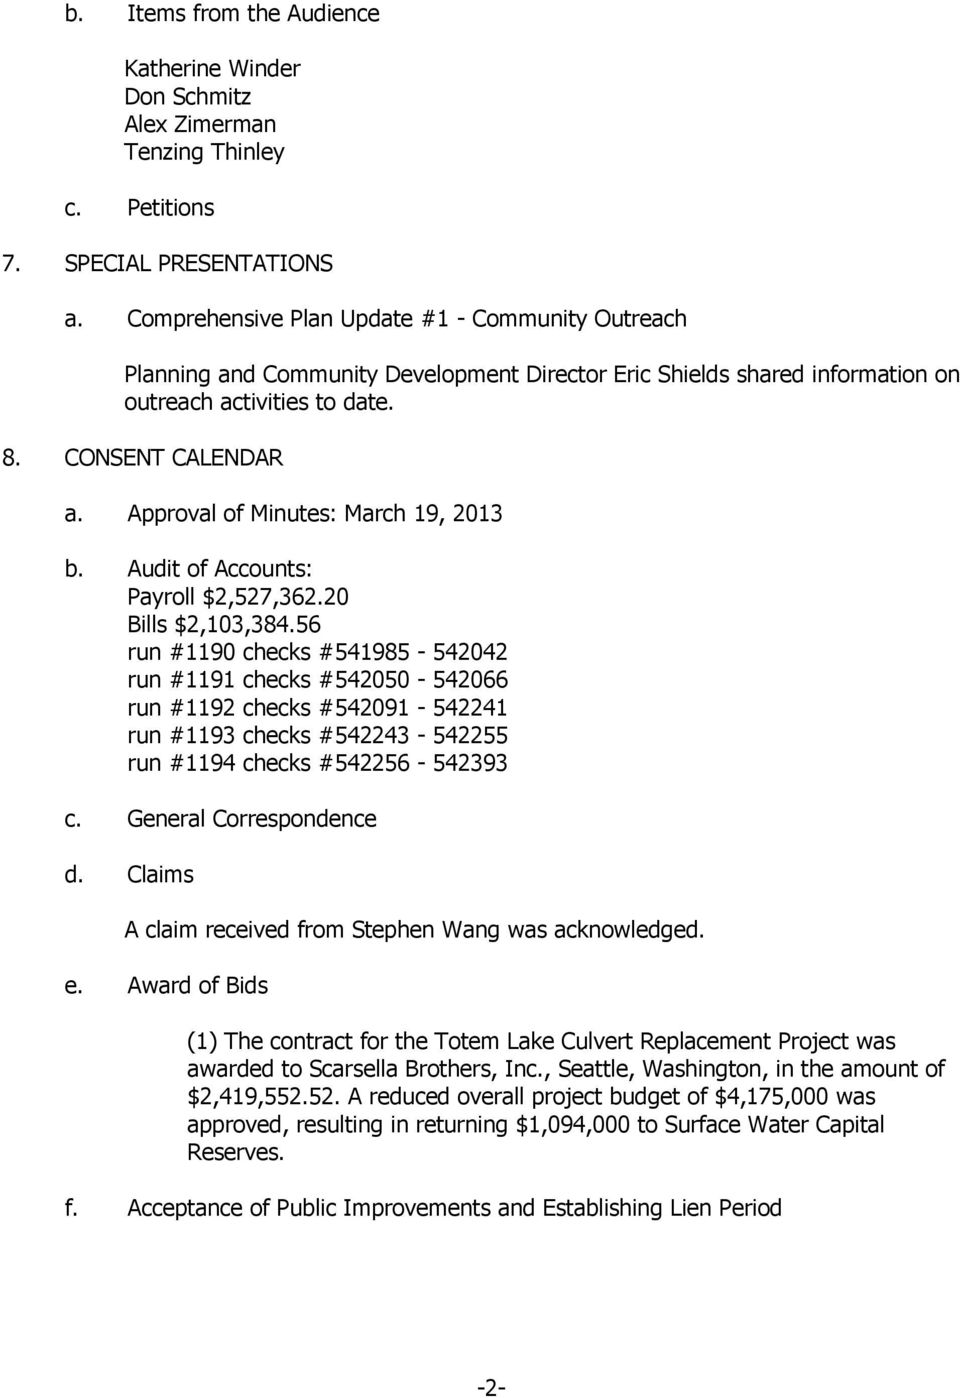 Approval of Minutes: March 19, 2013 b. Audit of Accounts: Payroll $2,527,362.20 Bills $2,103,384.